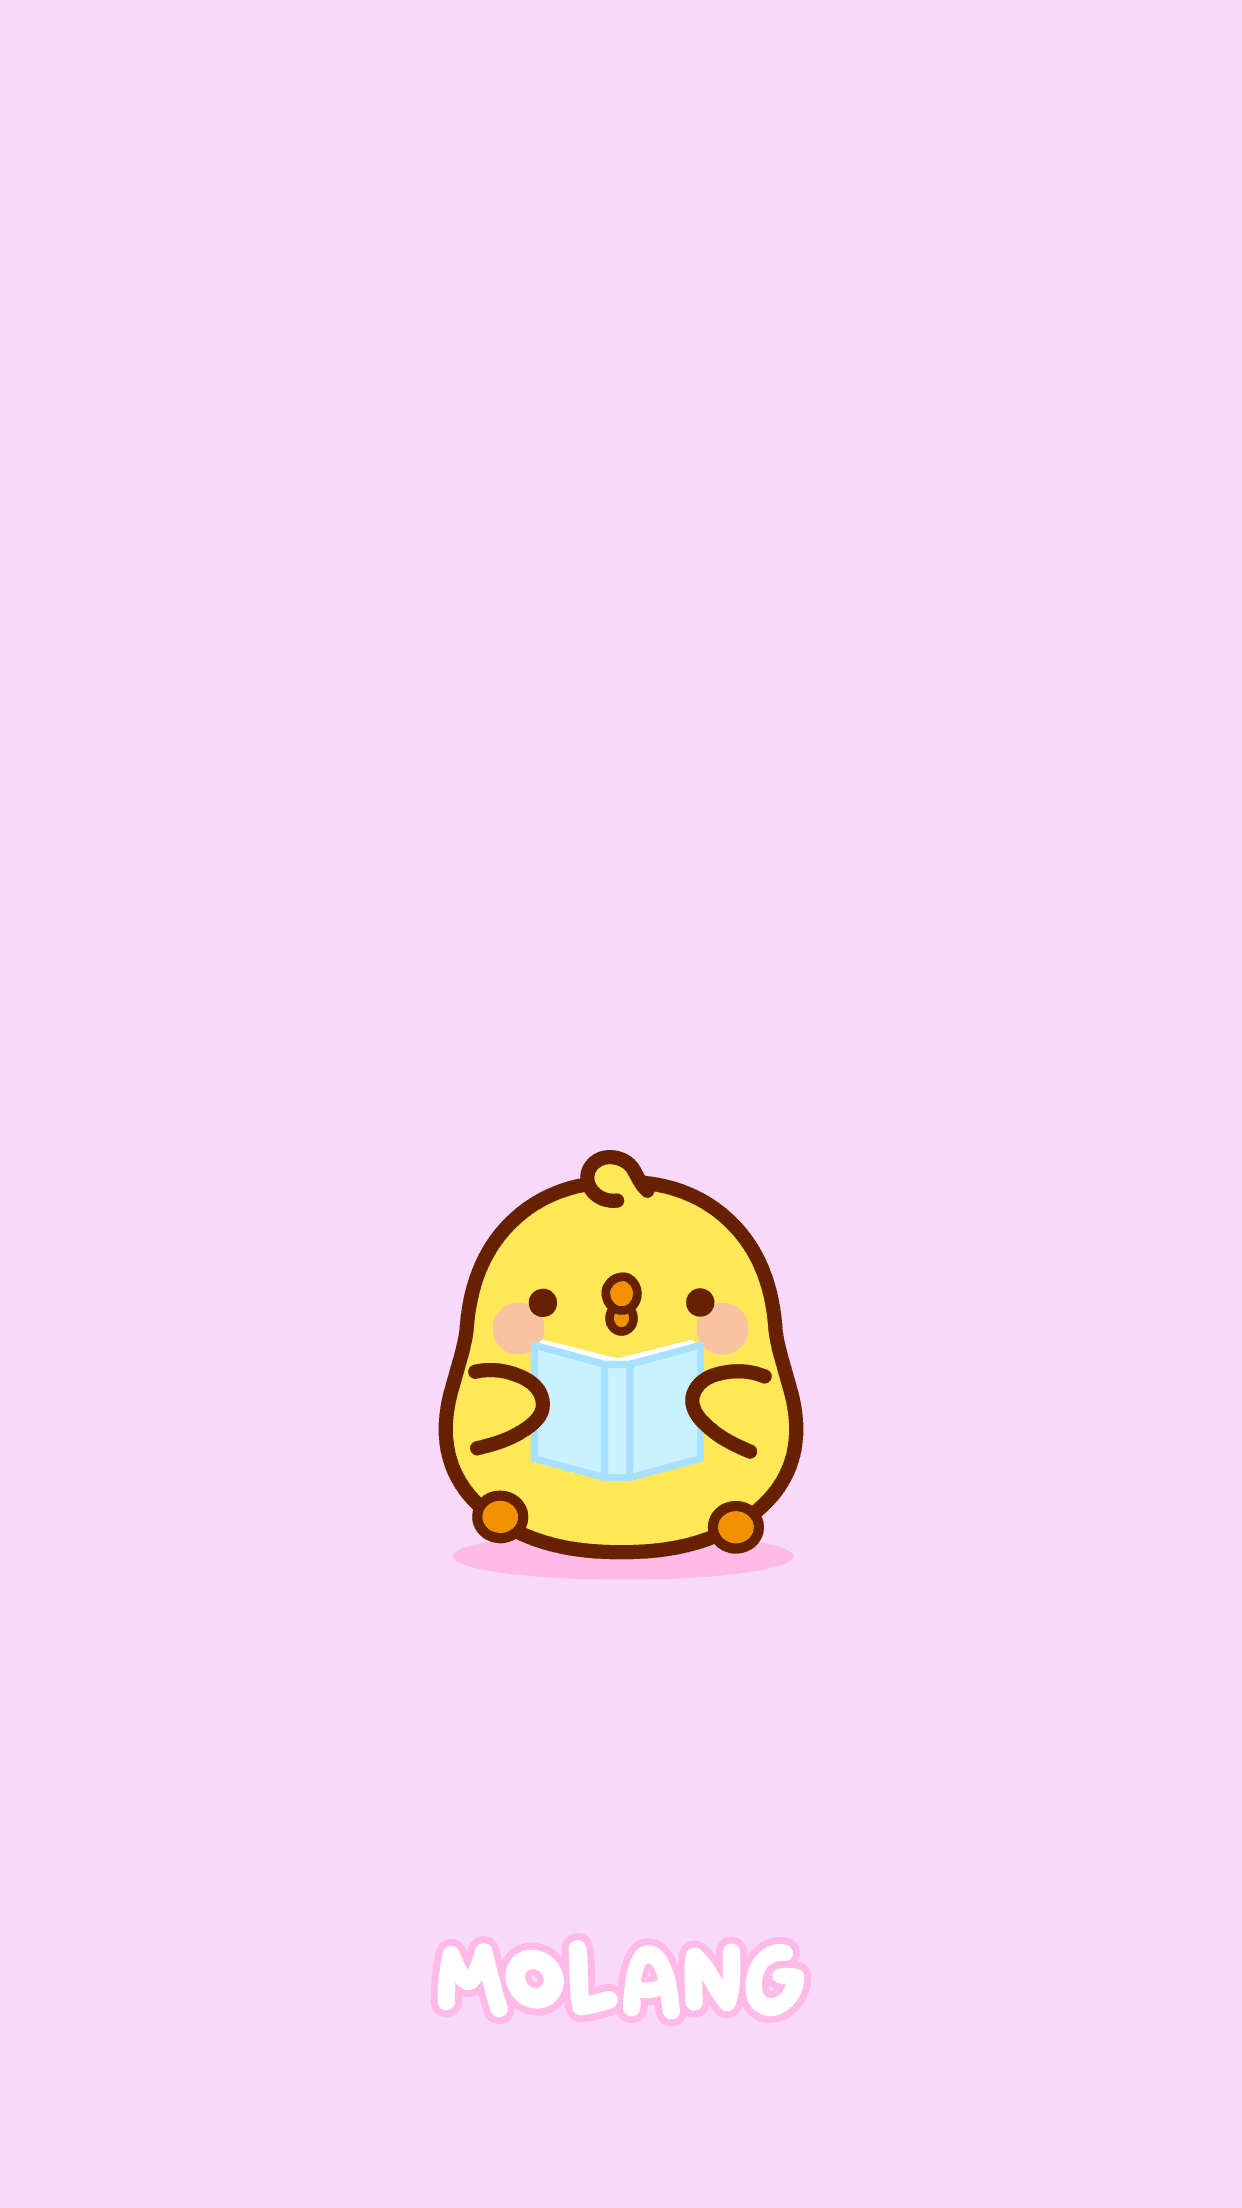 A cute little chicken is reading on the phone - Molang